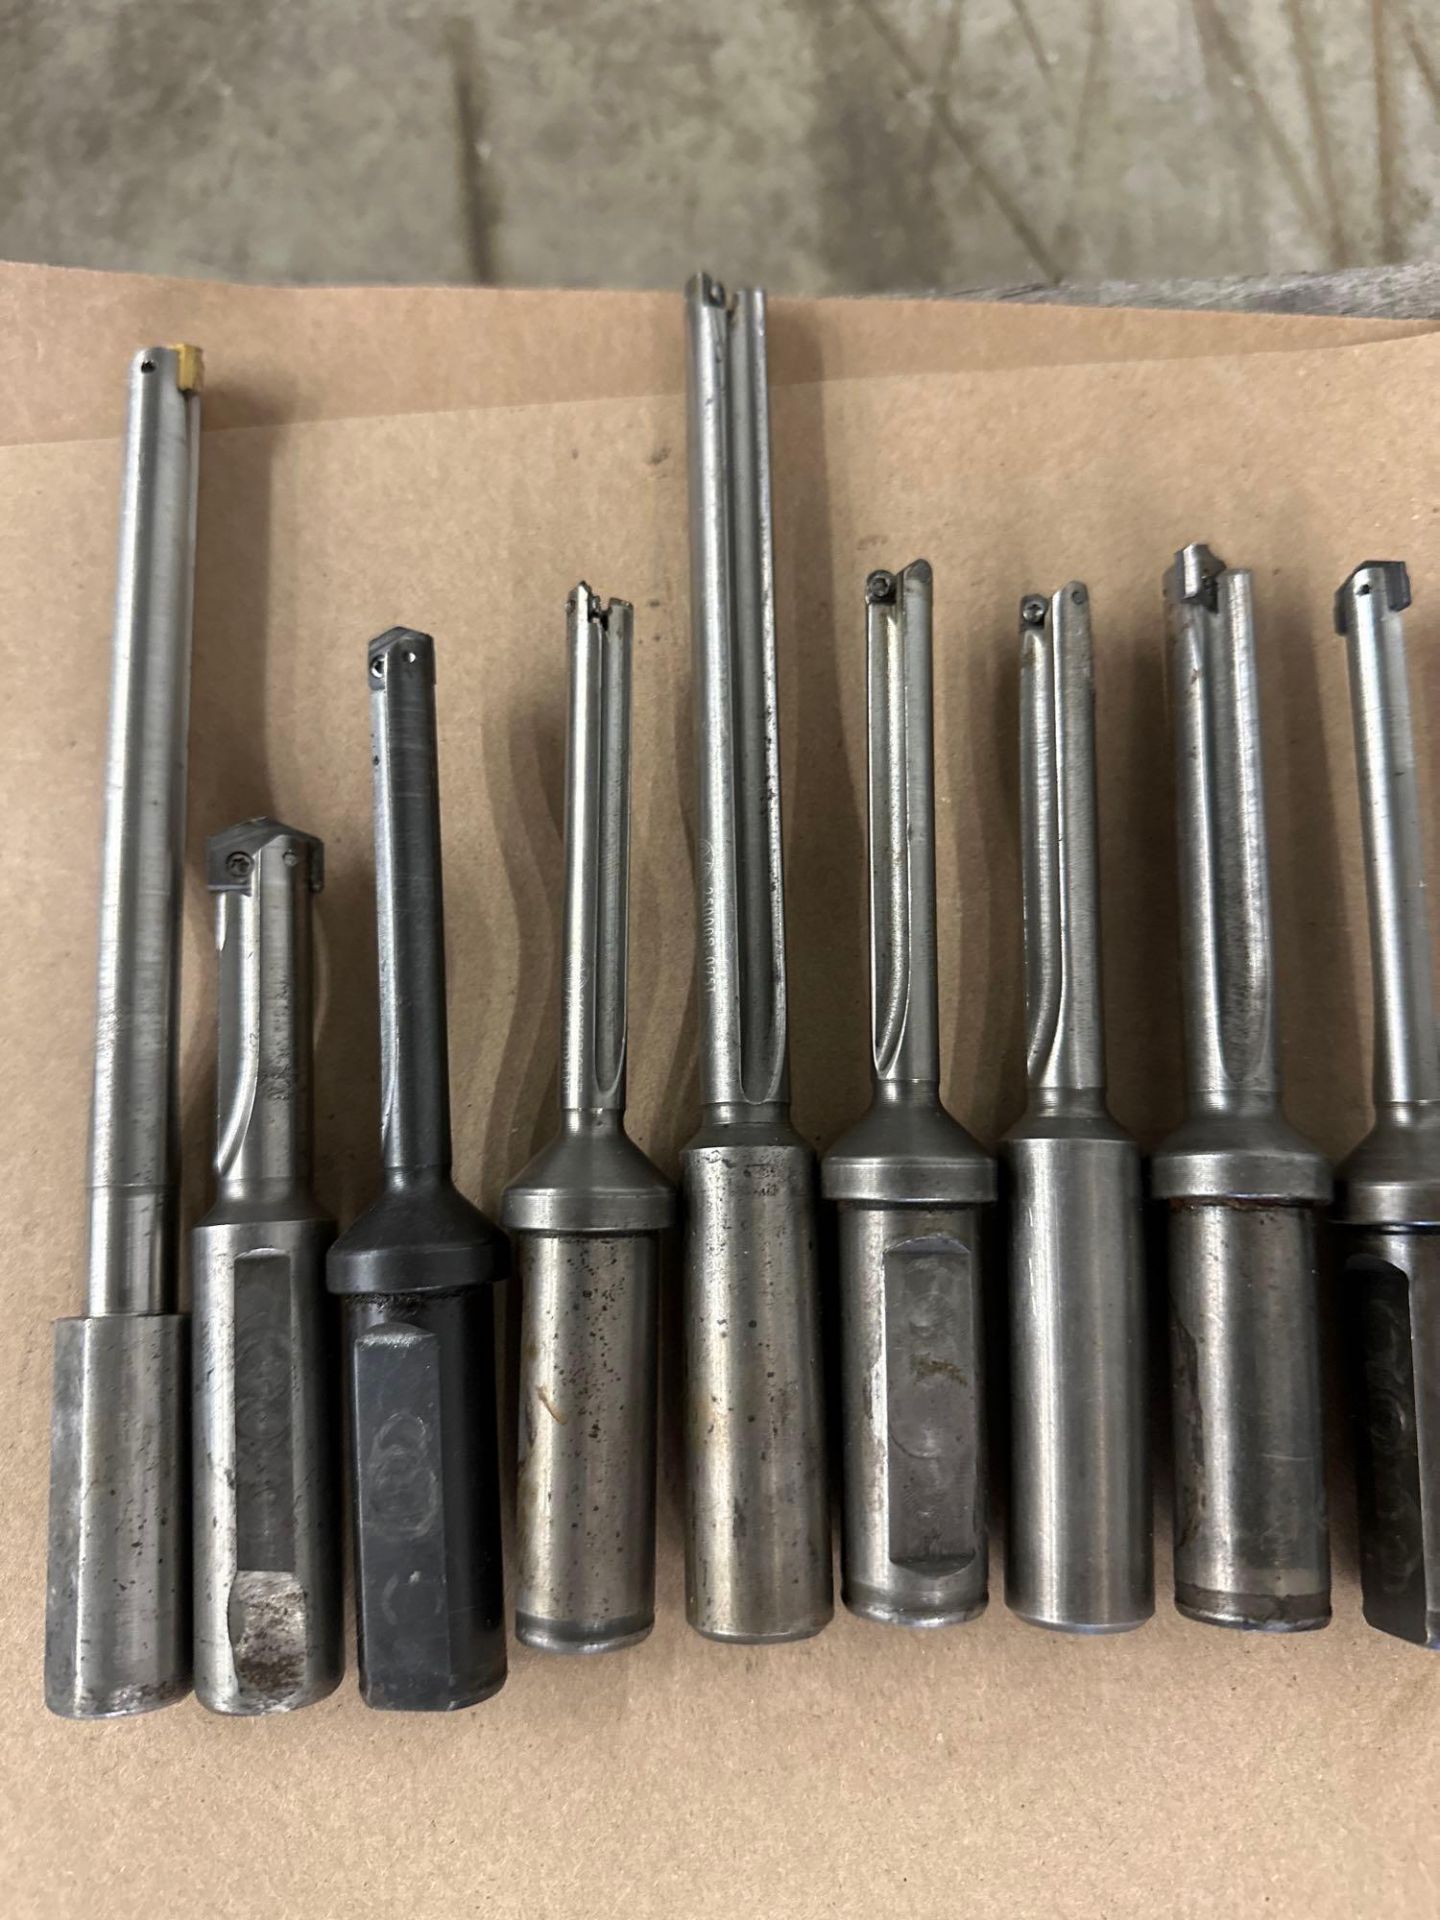 Lot of 9 Assorted Spade Insert Boring Bars Size Ranging From: 3/4” X 4 5/8” to 3/4” X 7 3/4” - Image 4 of 6